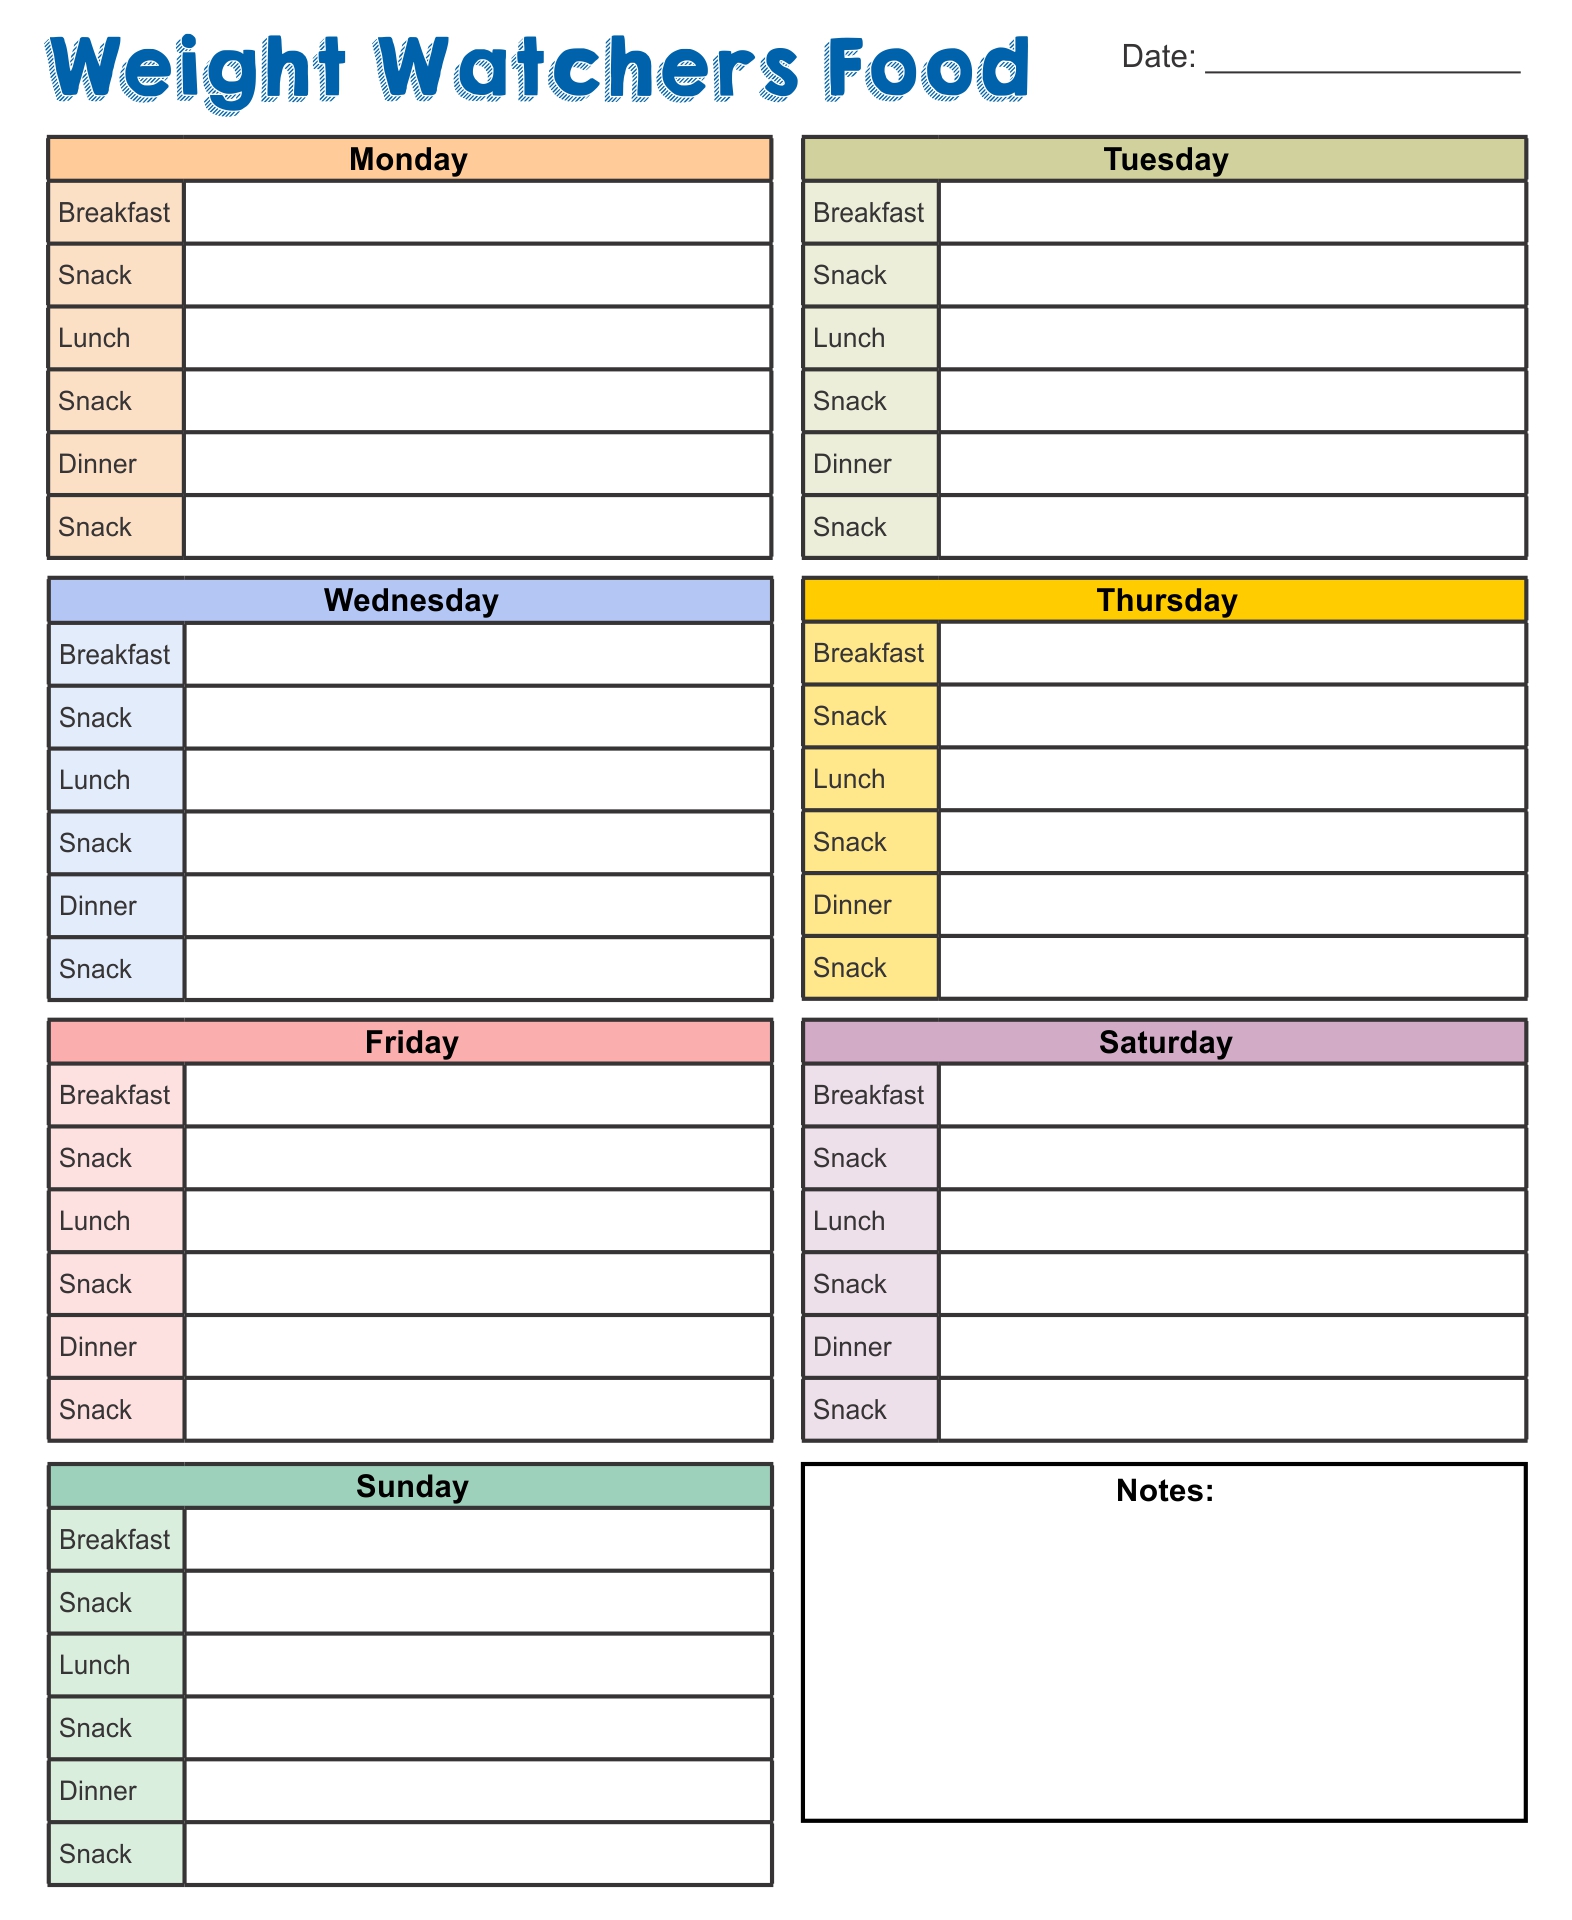 8-best-images-of-weight-watchers-journal-printable-weight-watchers-food-journal-template